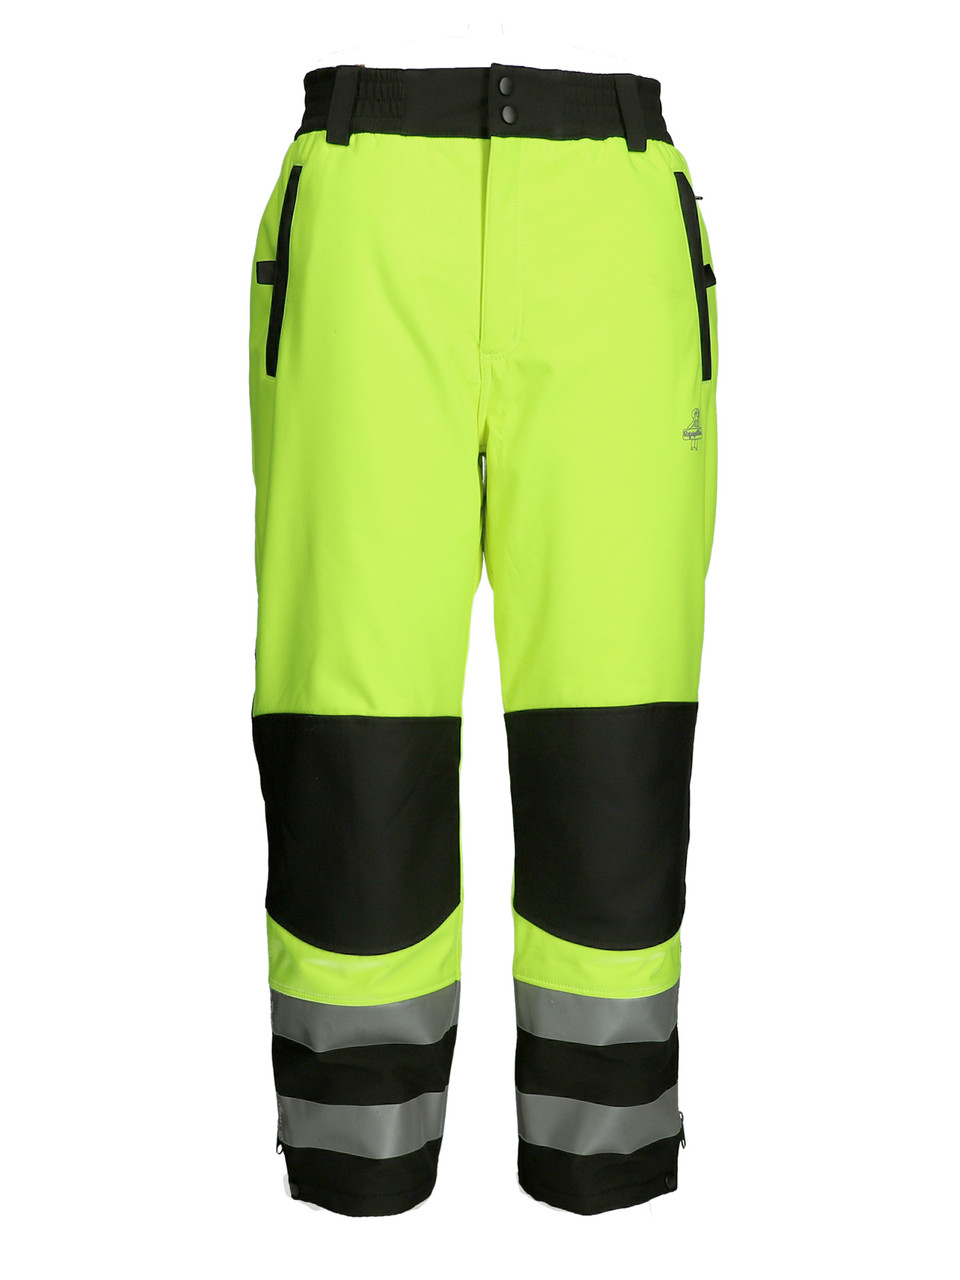 HiVis Insulated Waterproof Pants (9325), ANSI Class E, Rated for 0°F